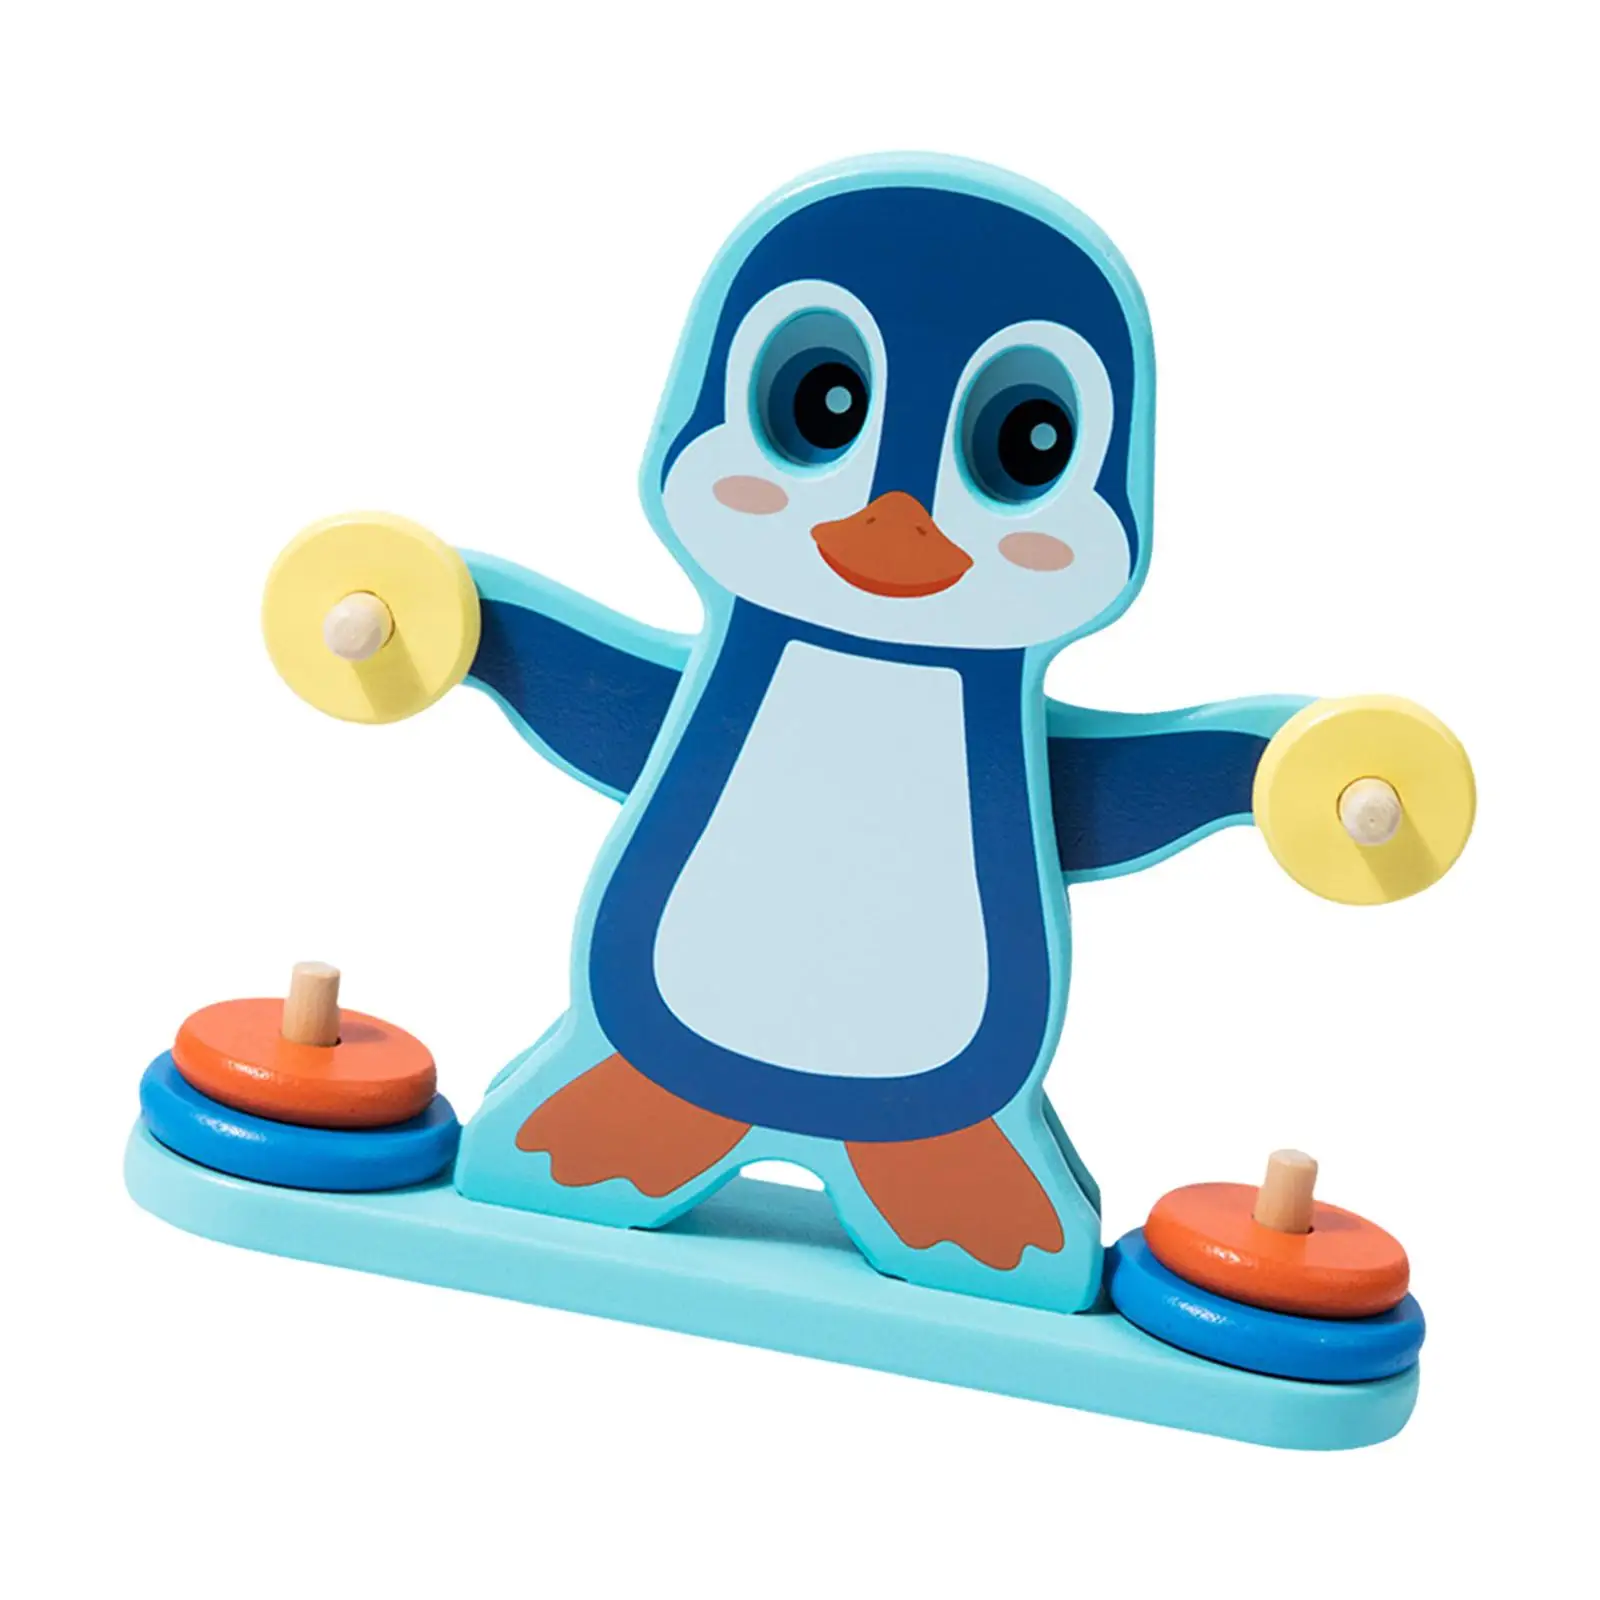 Penguin Balance Counting Game Number Recognition Math Scale Toy Kids Enlightenment Toy for Math Toy Boys Girls Preschoolers Kids